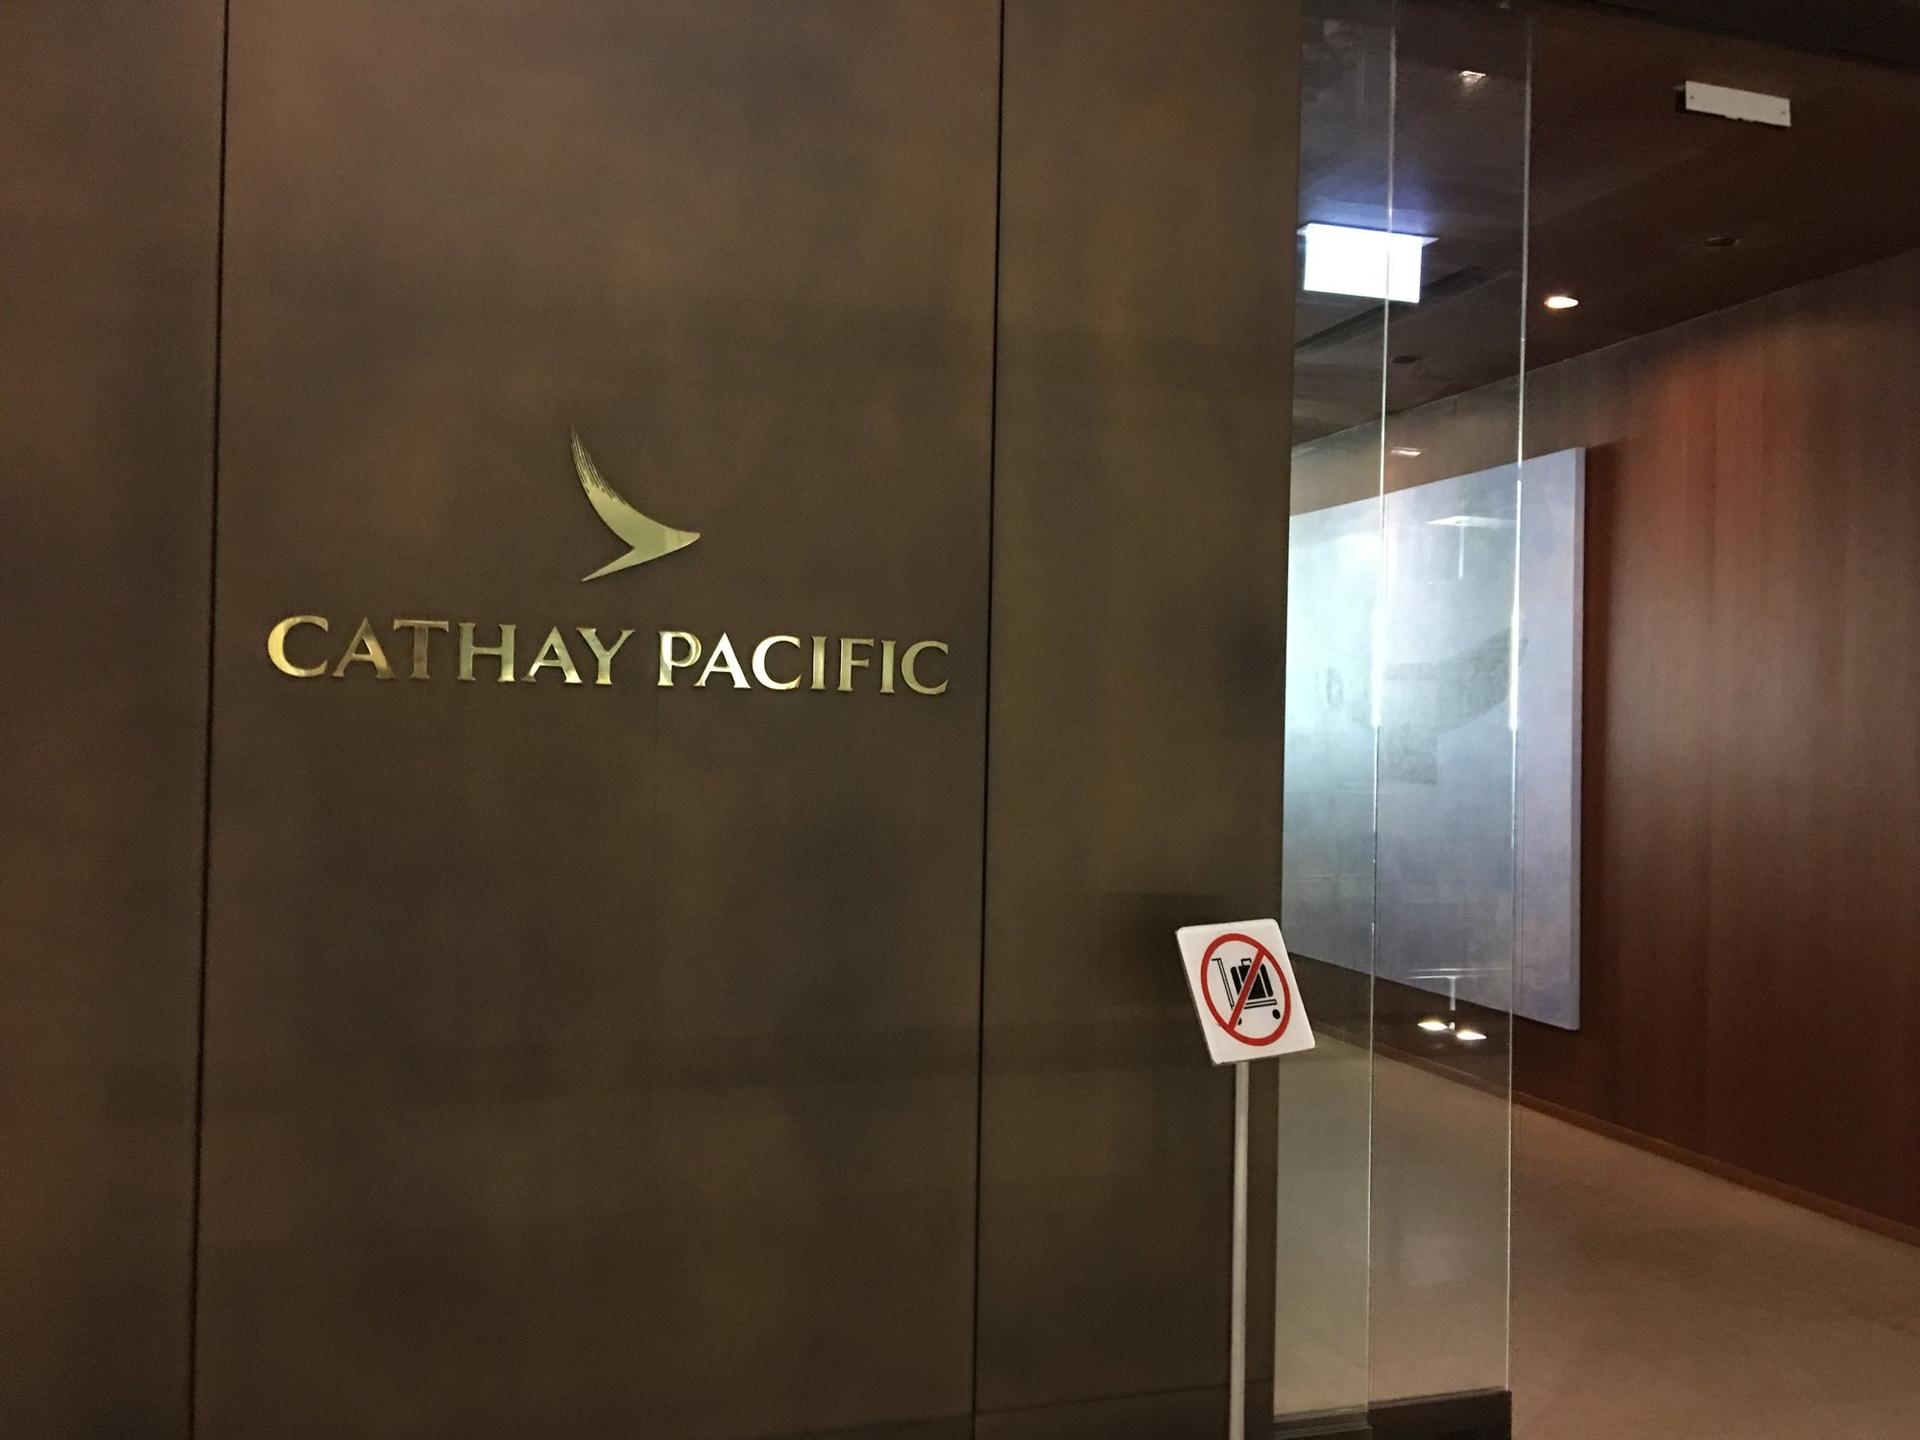 Cathay Pacific First and Business Class Lounge image 68 of 69